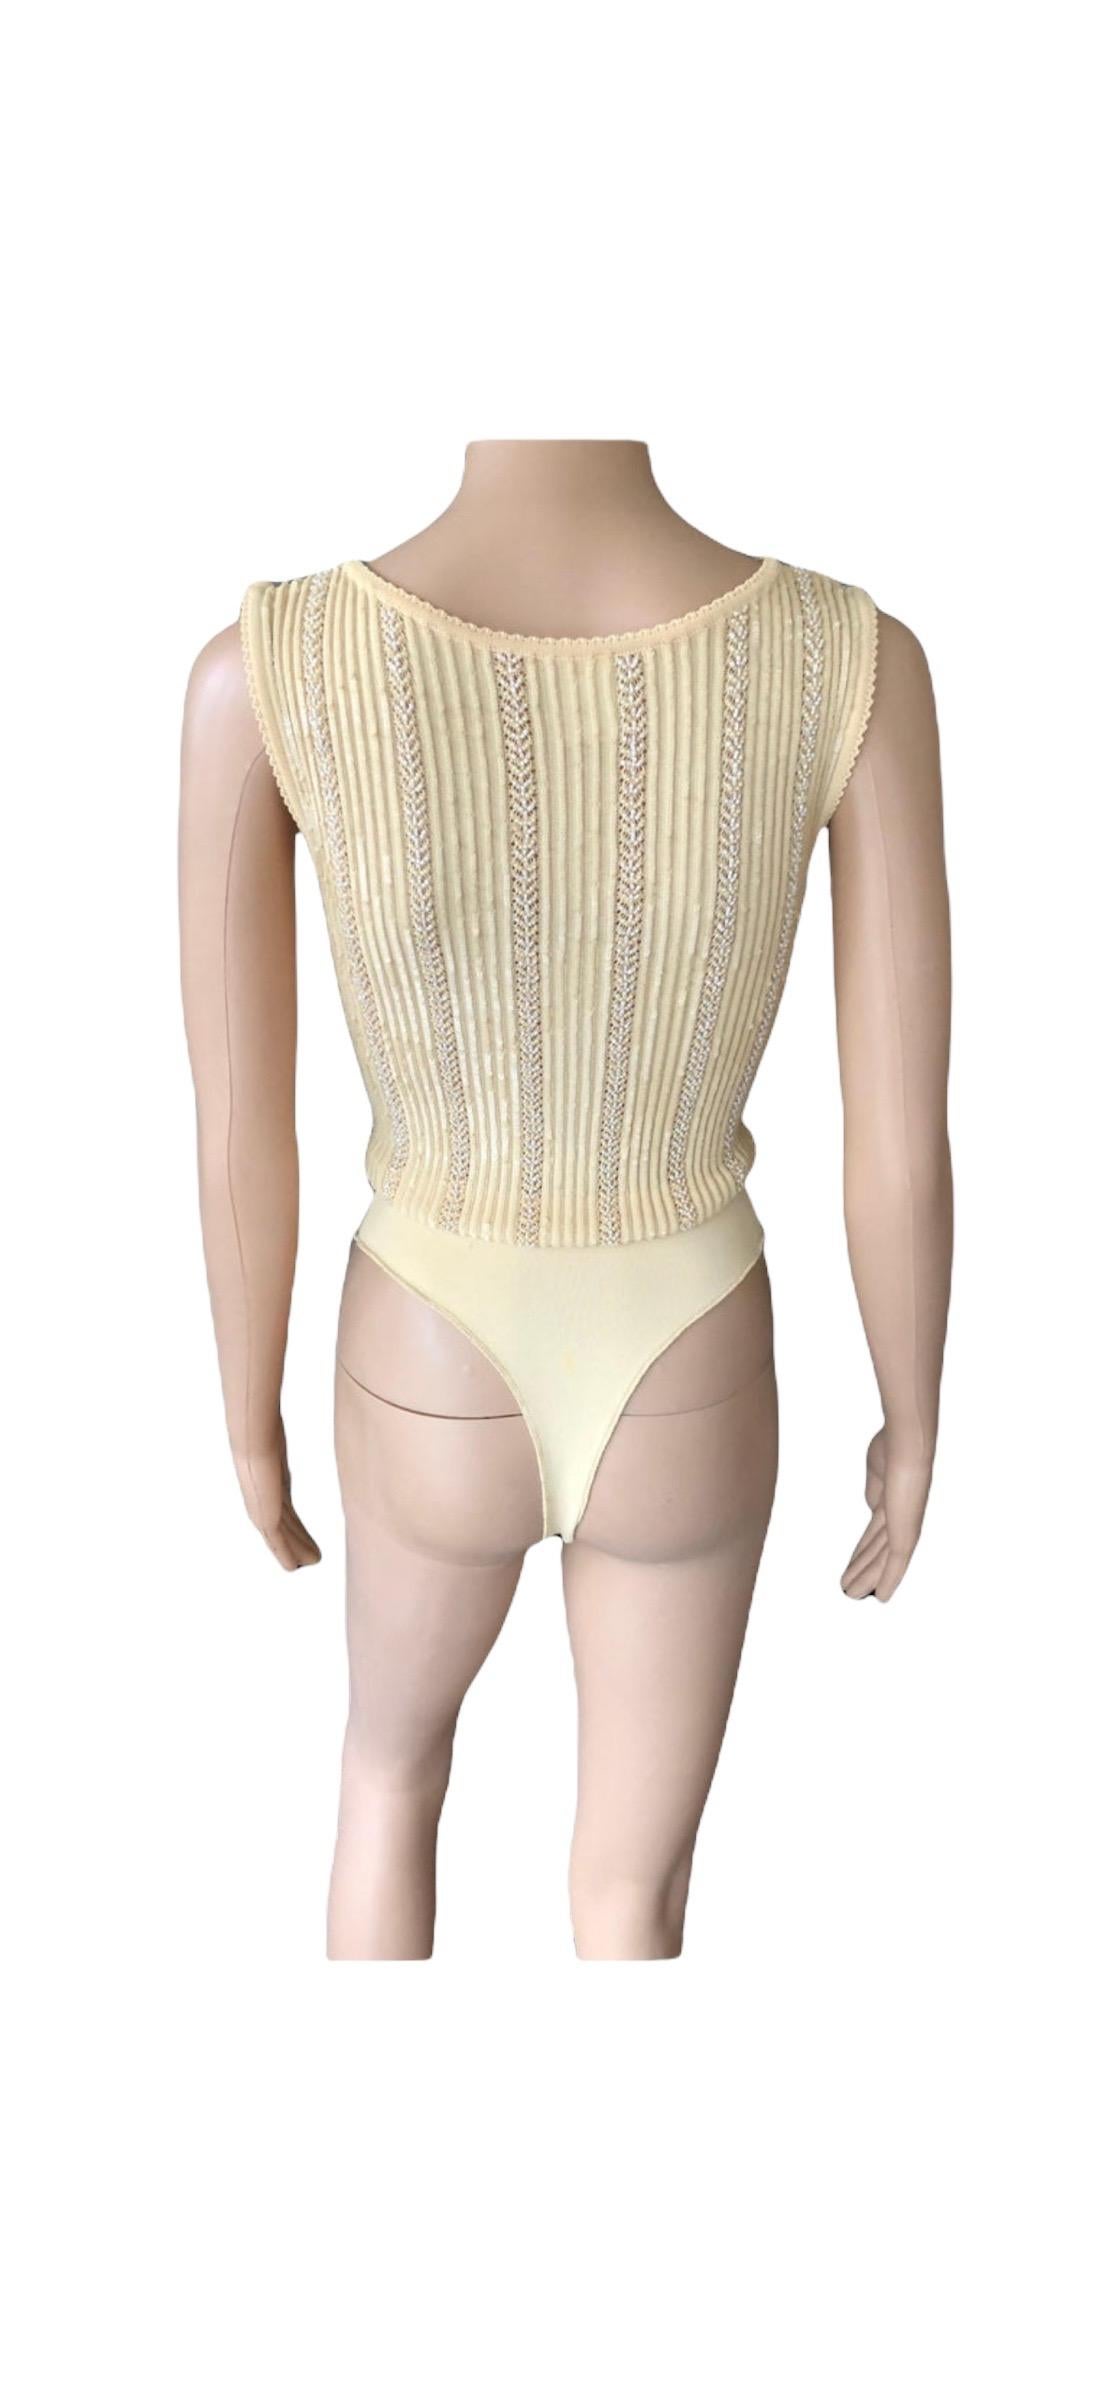 Azzedine Alaia Vintage S/S 1996 Runway Sequin Beaded Embellished Bodysuit Top For Sale 3